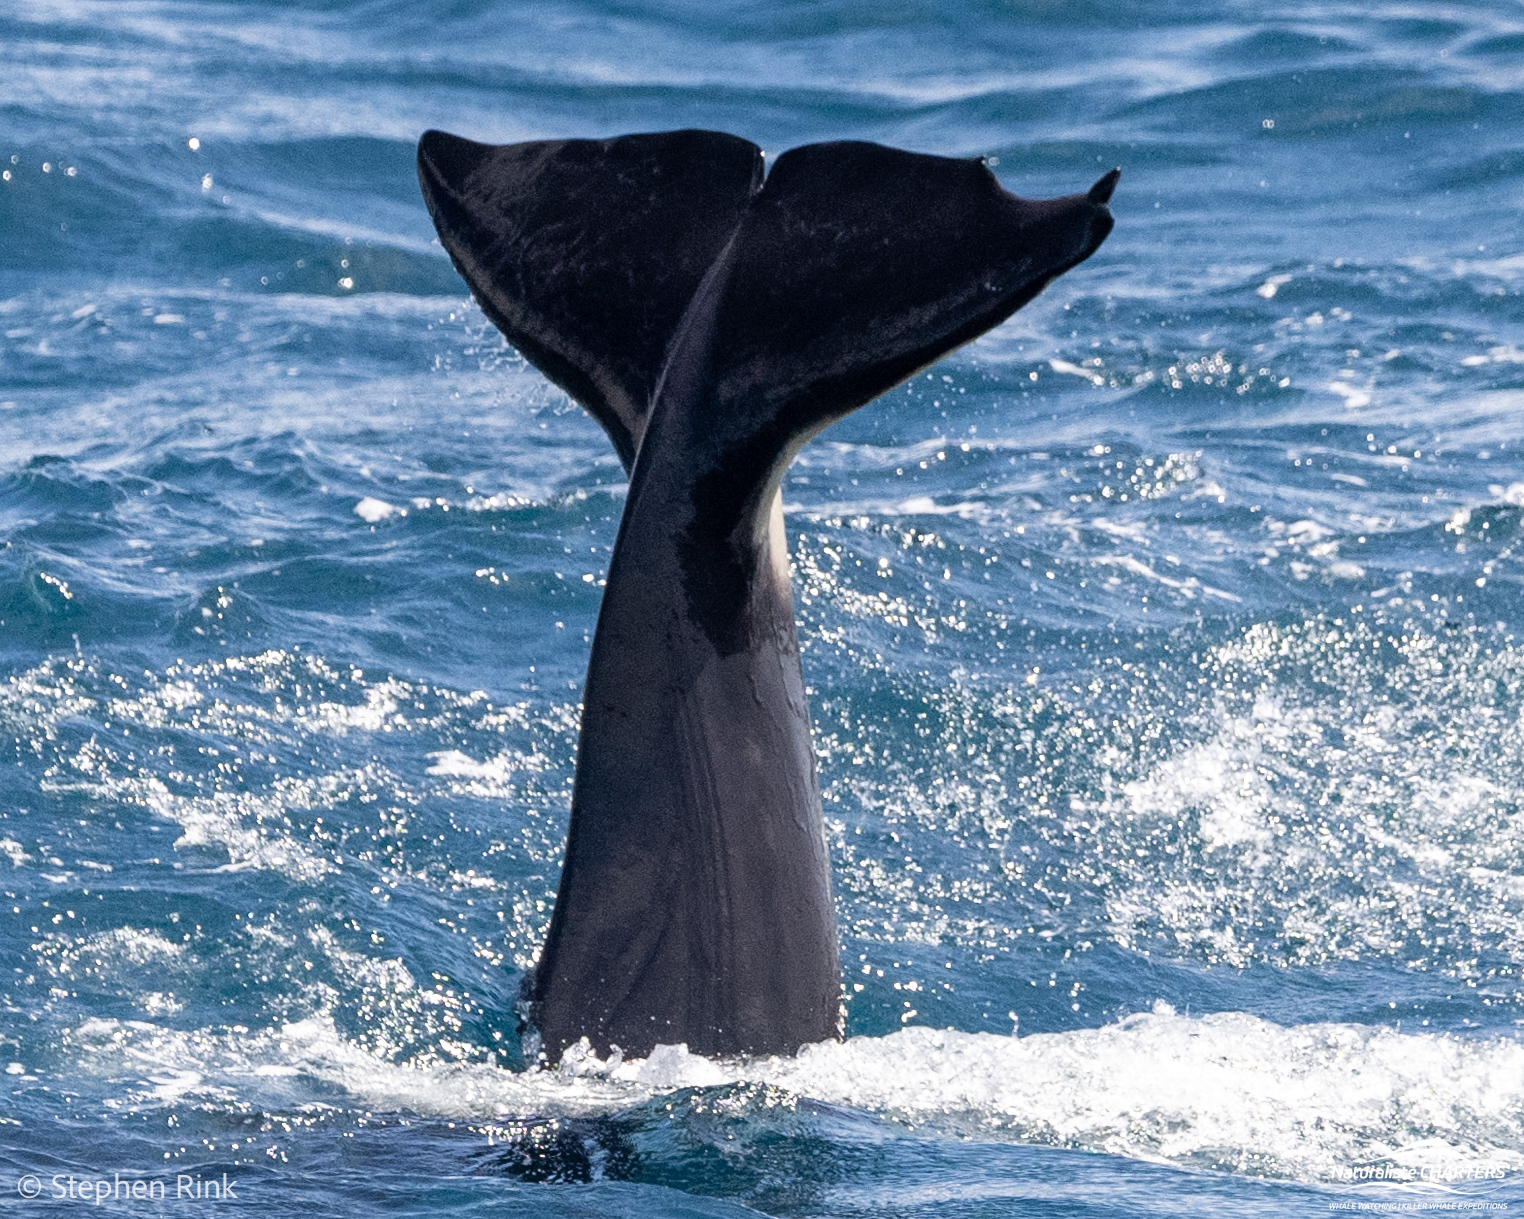 Tail slaps and waves are indicative of Bremer Canyon orca behaviour